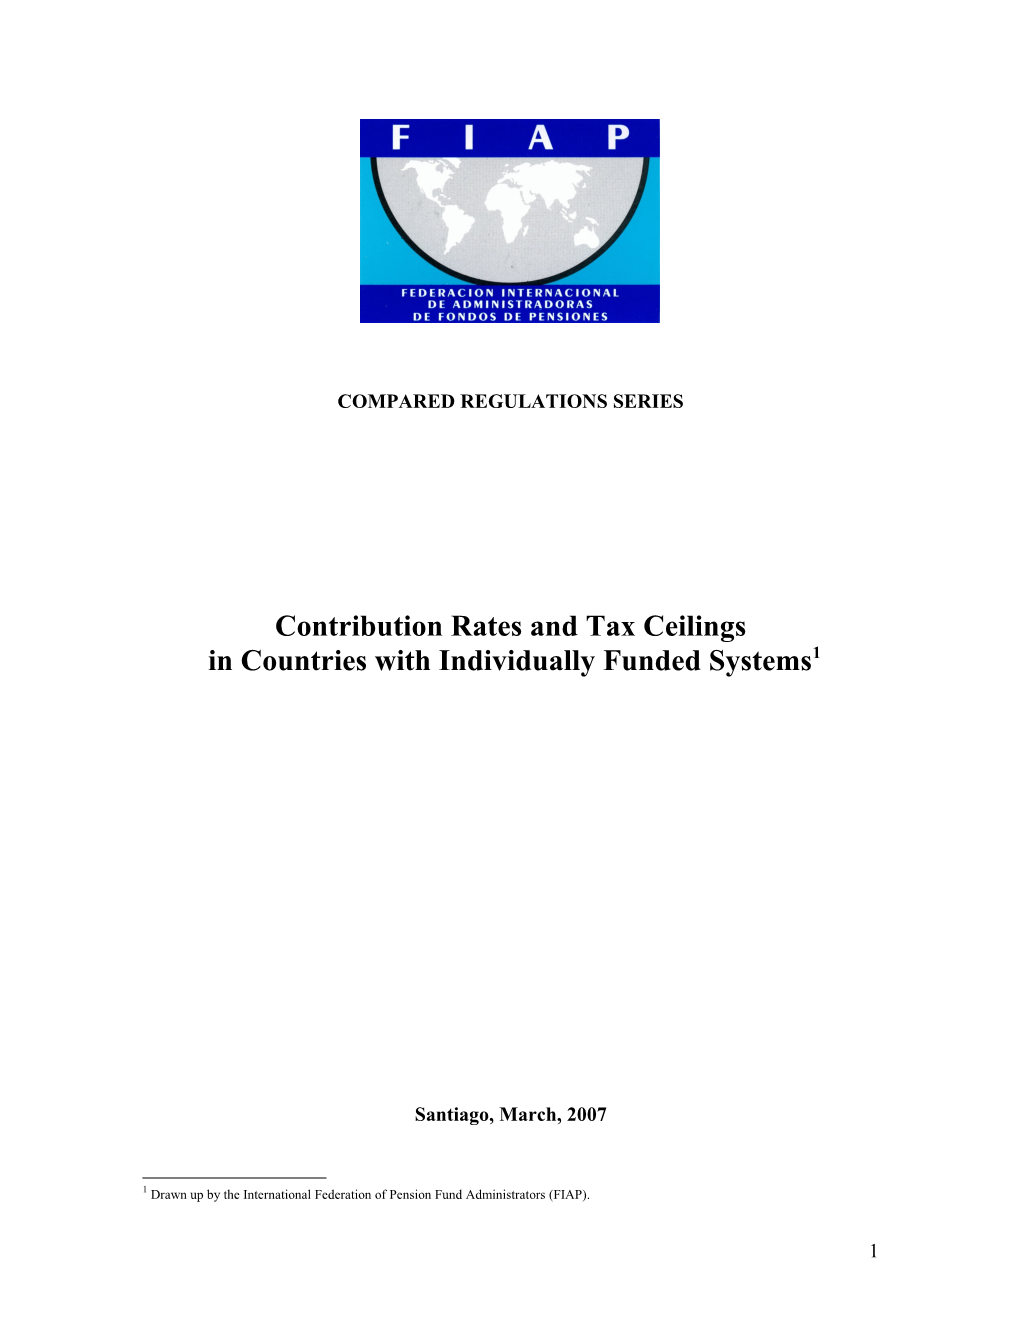 Contribution Rates and Tax Ceilings